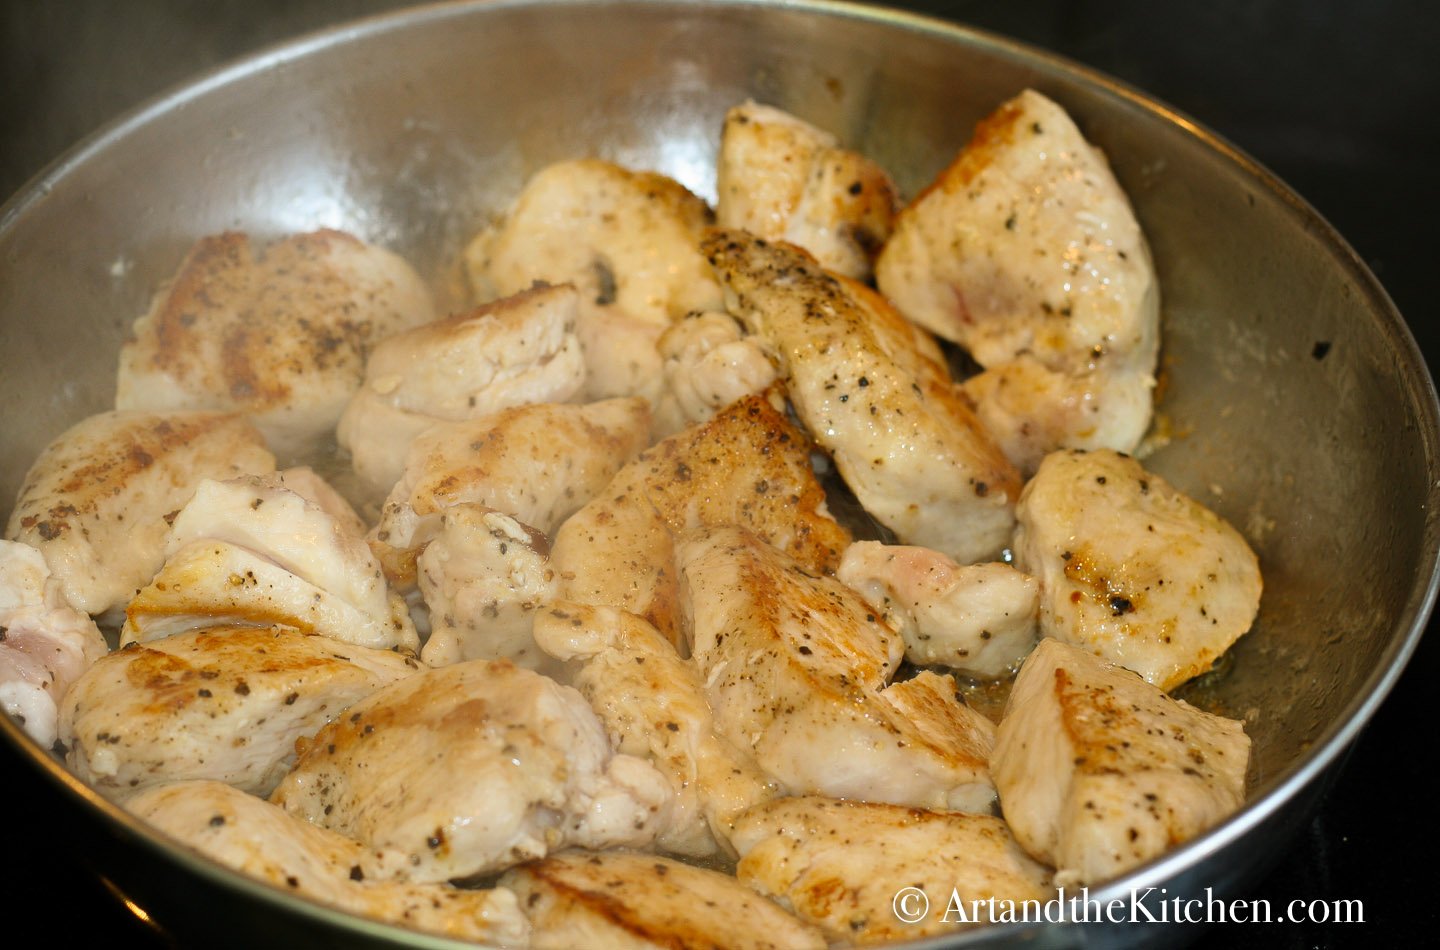 chopped up chicken frying in stainless steel skillet.